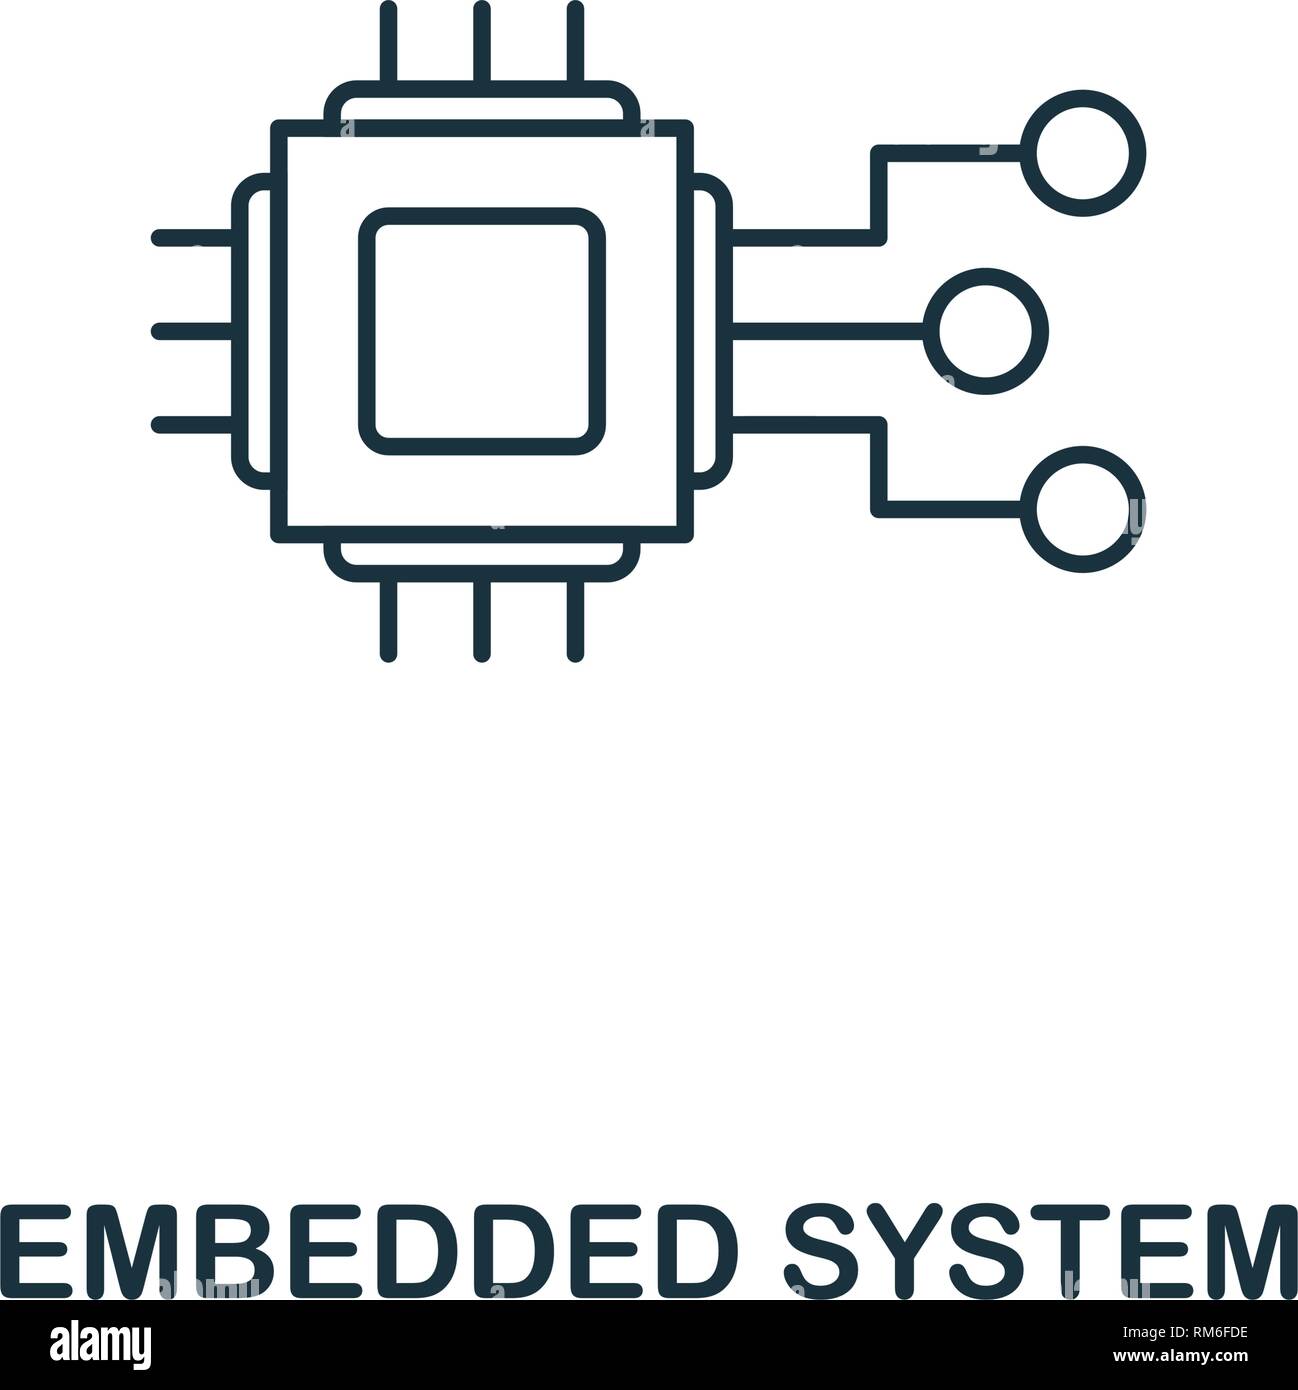 Embedded System Symbol. Thin line style Industrie 4.0 icons Collection. UI und UX. Pixel Perfect embedded System Symbol für Web Design, Apps, Software Stock Vektor